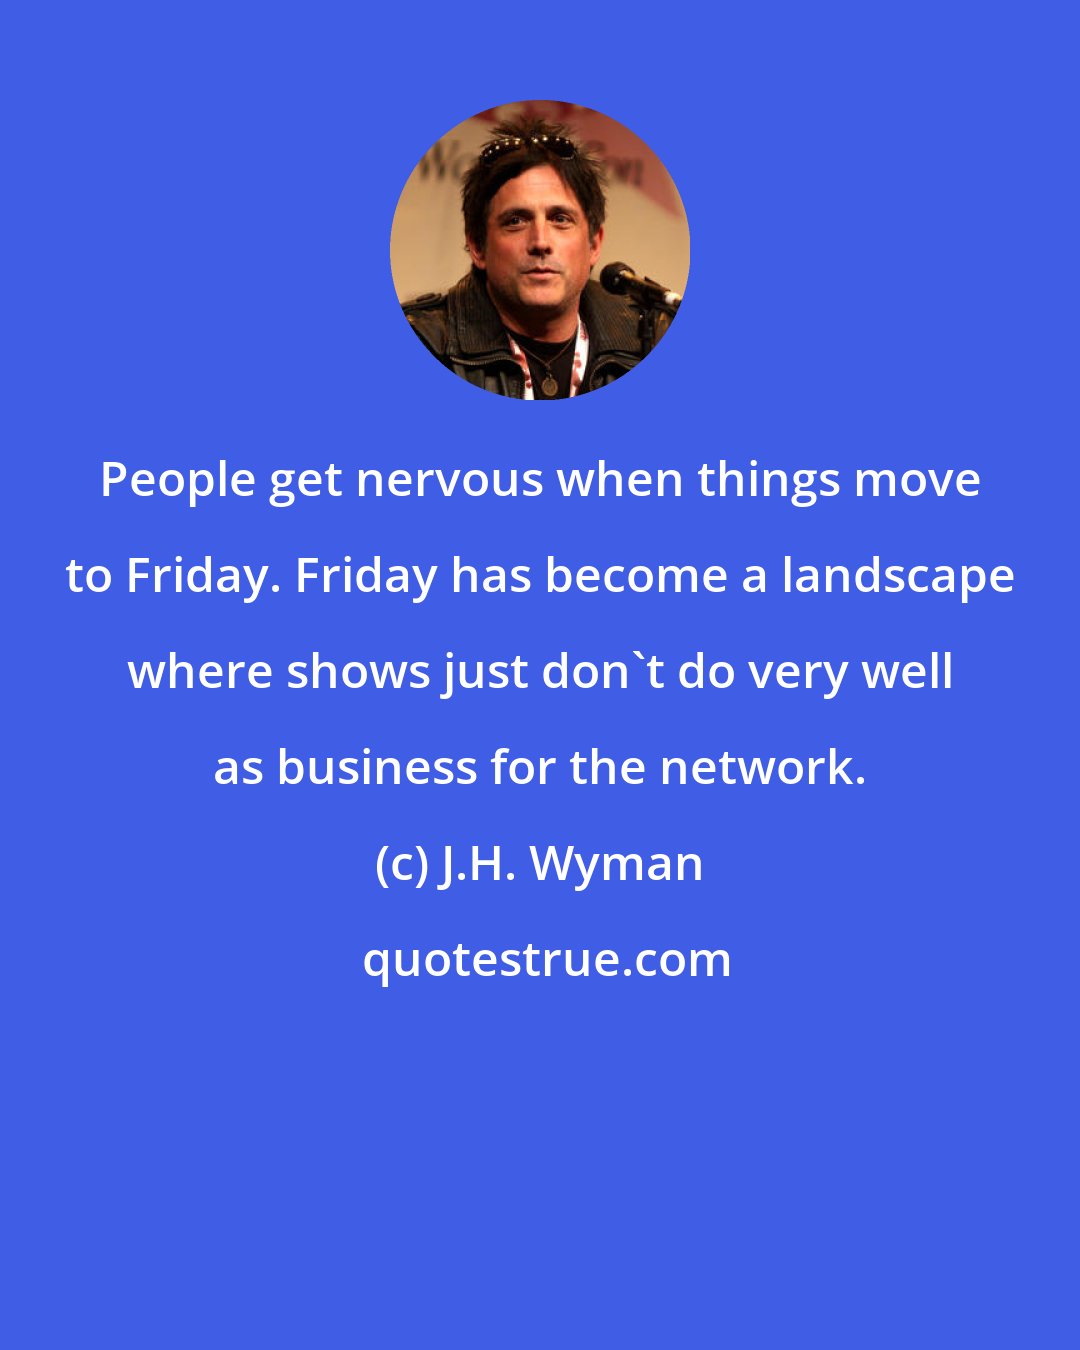 J.H. Wyman: People get nervous when things move to Friday. Friday has become a landscape where shows just don't do very well as business for the network.